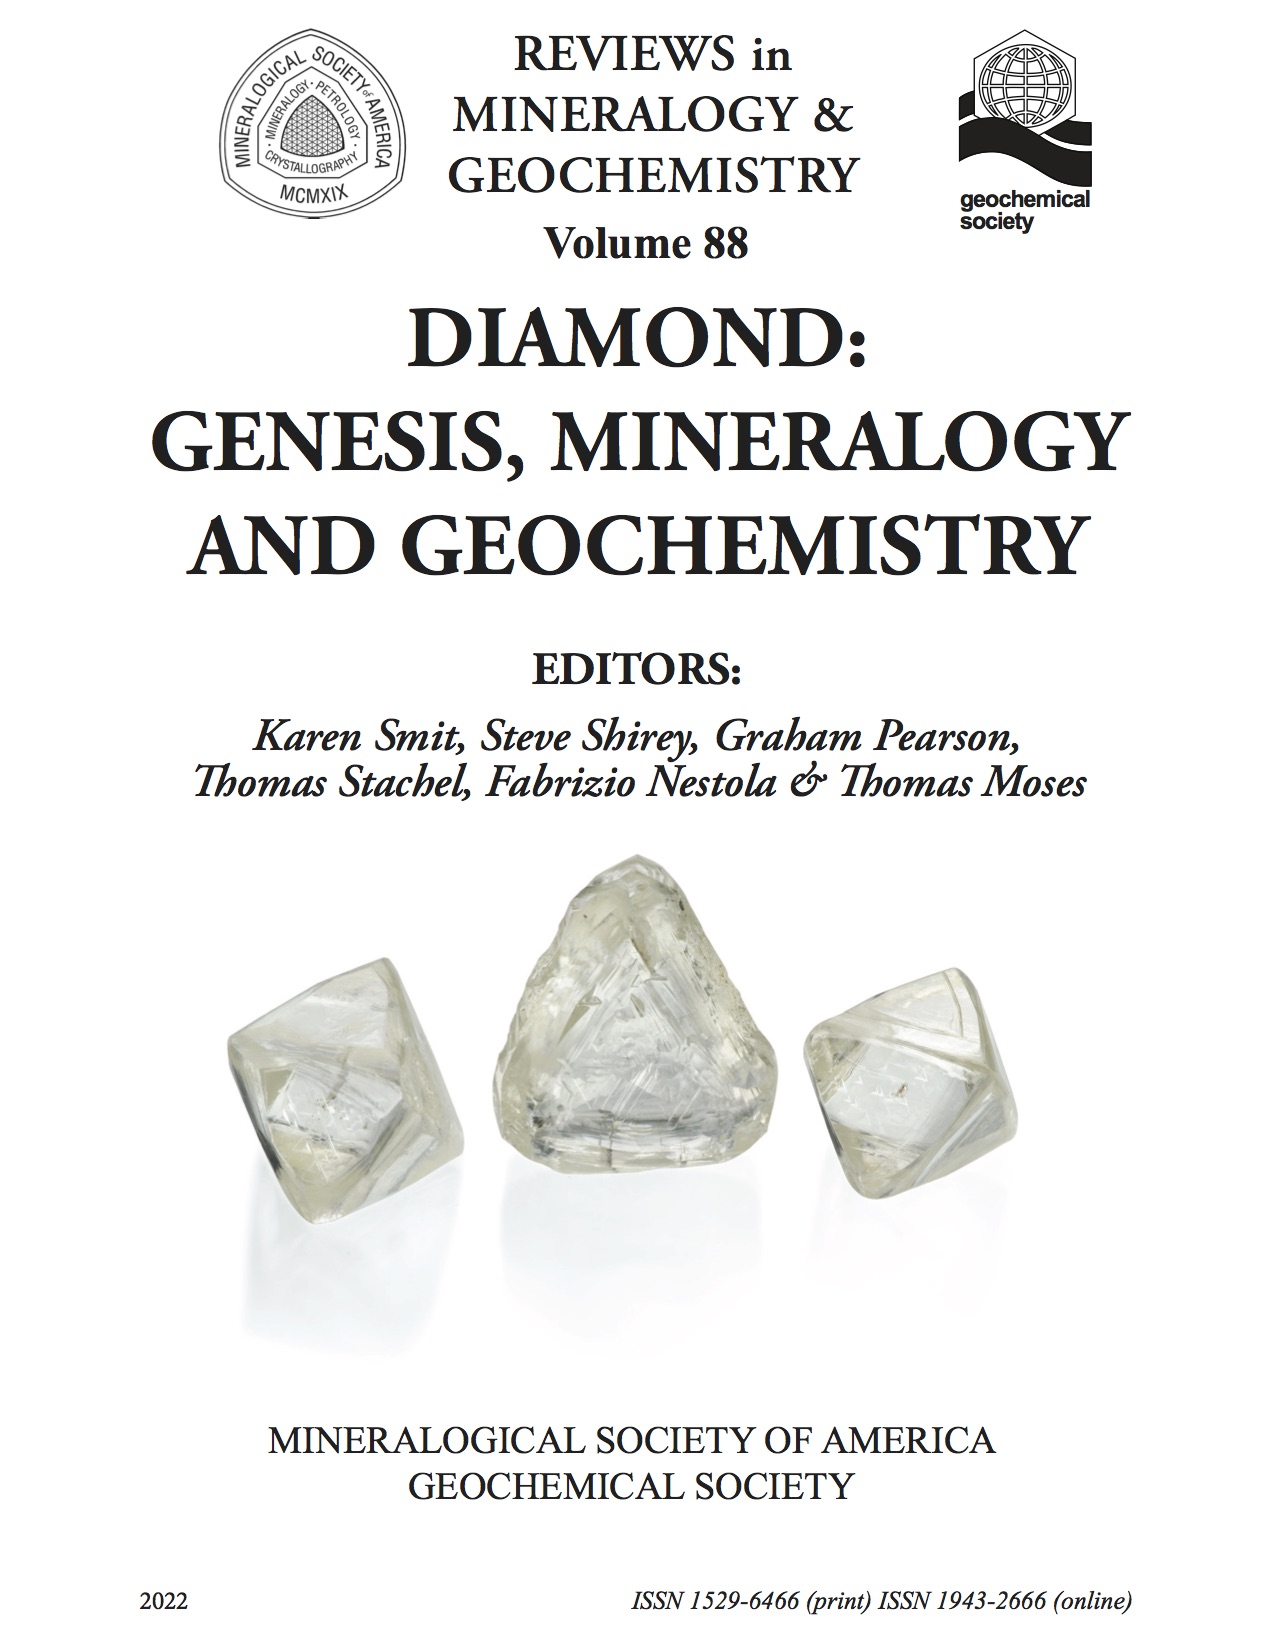 Front Cover of Reviews in Mineralogy and Geochemistry vol 88